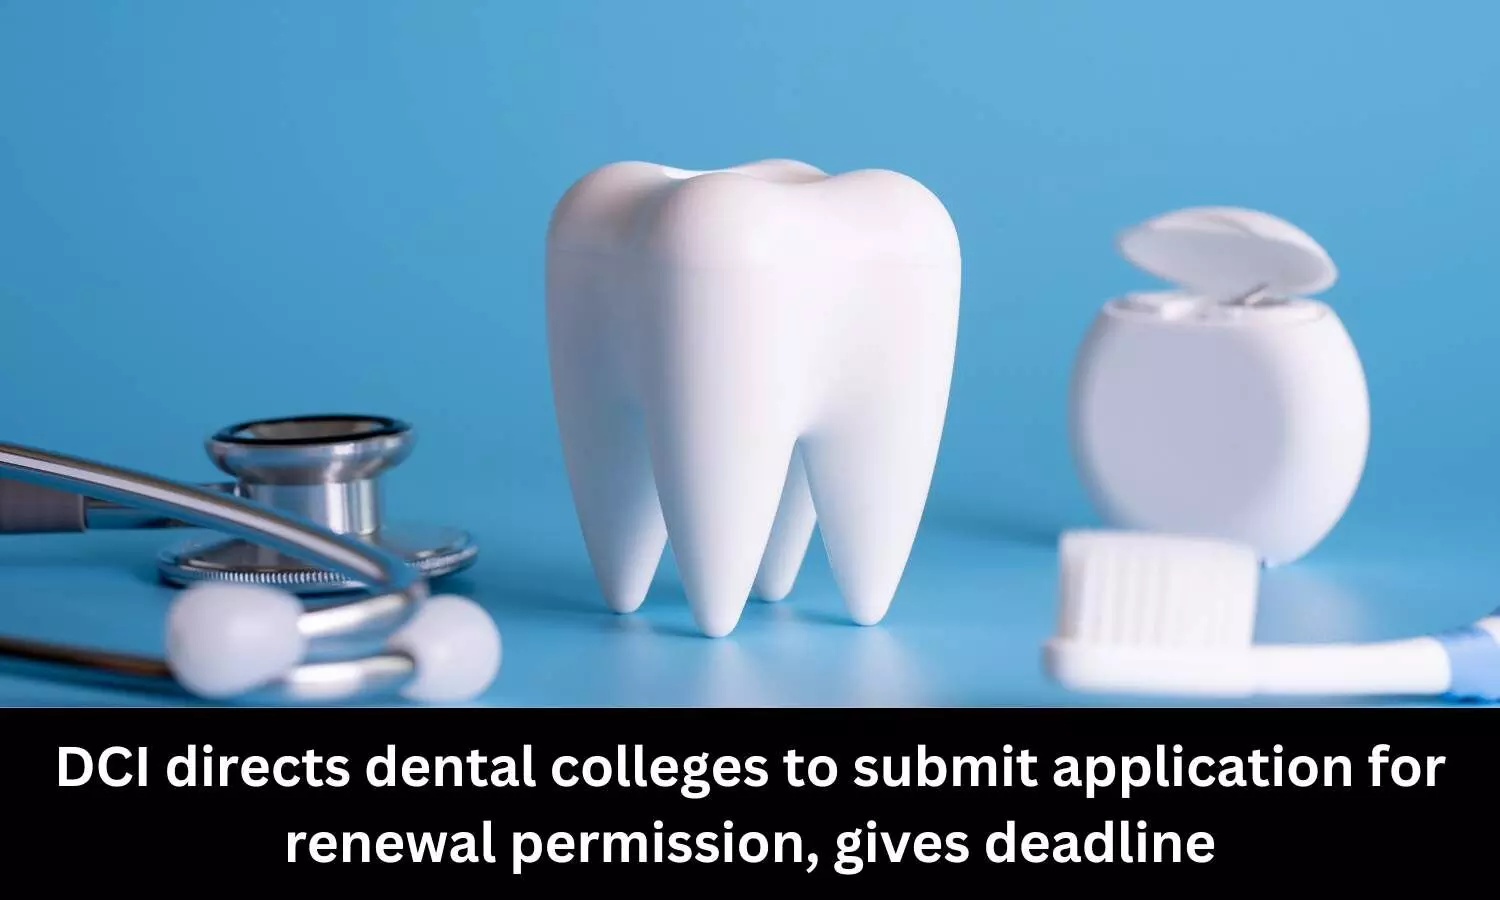 Submit application for renewal permission: DCI directs dental colleges